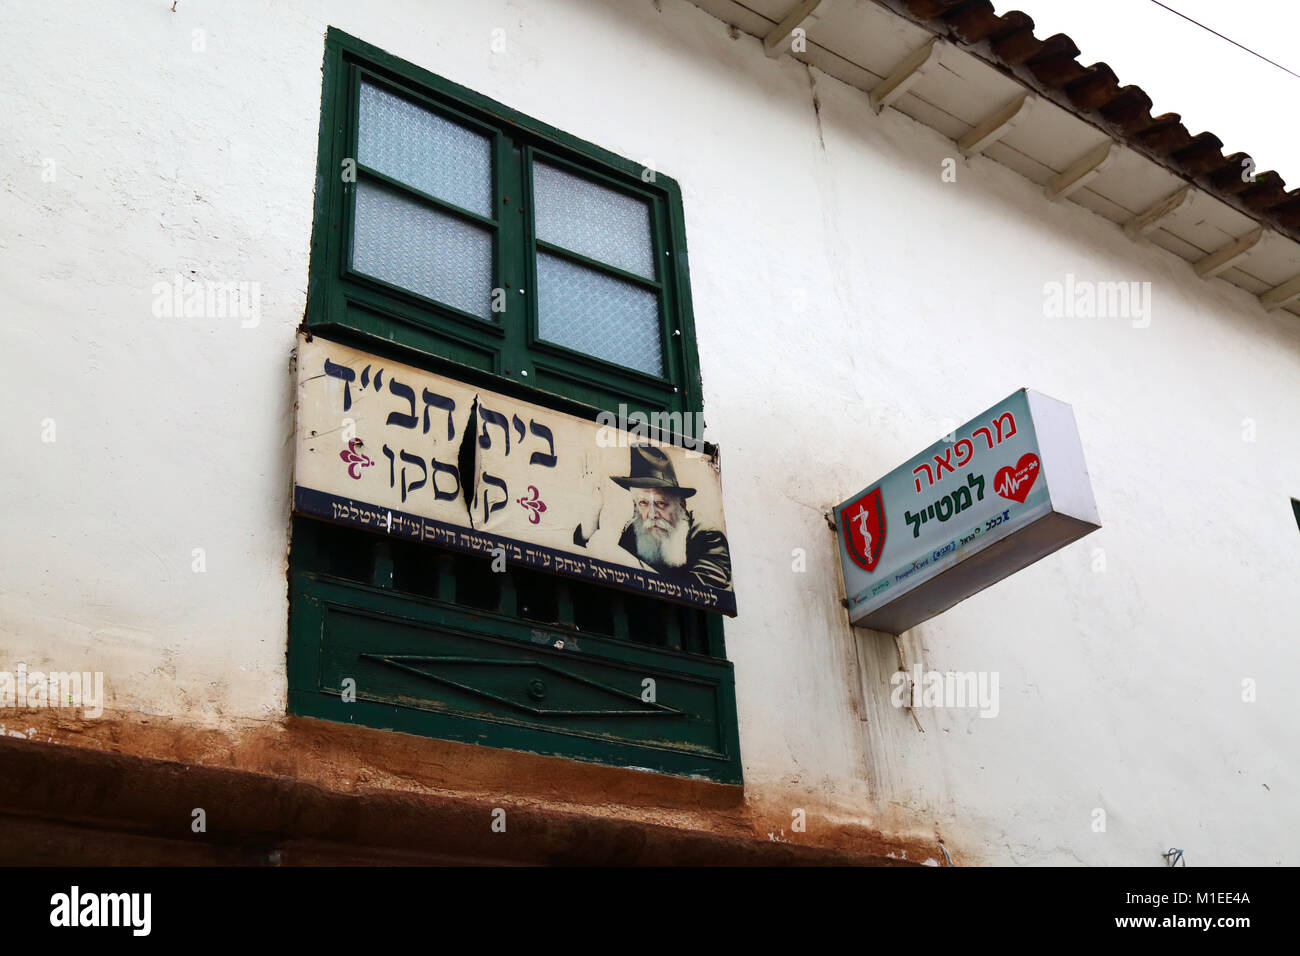 Chabad House Israeli / Jewish restaurant sign and Rod of Asclepius symbol indicating a health clinic, Cusco, Peru Stock Photo